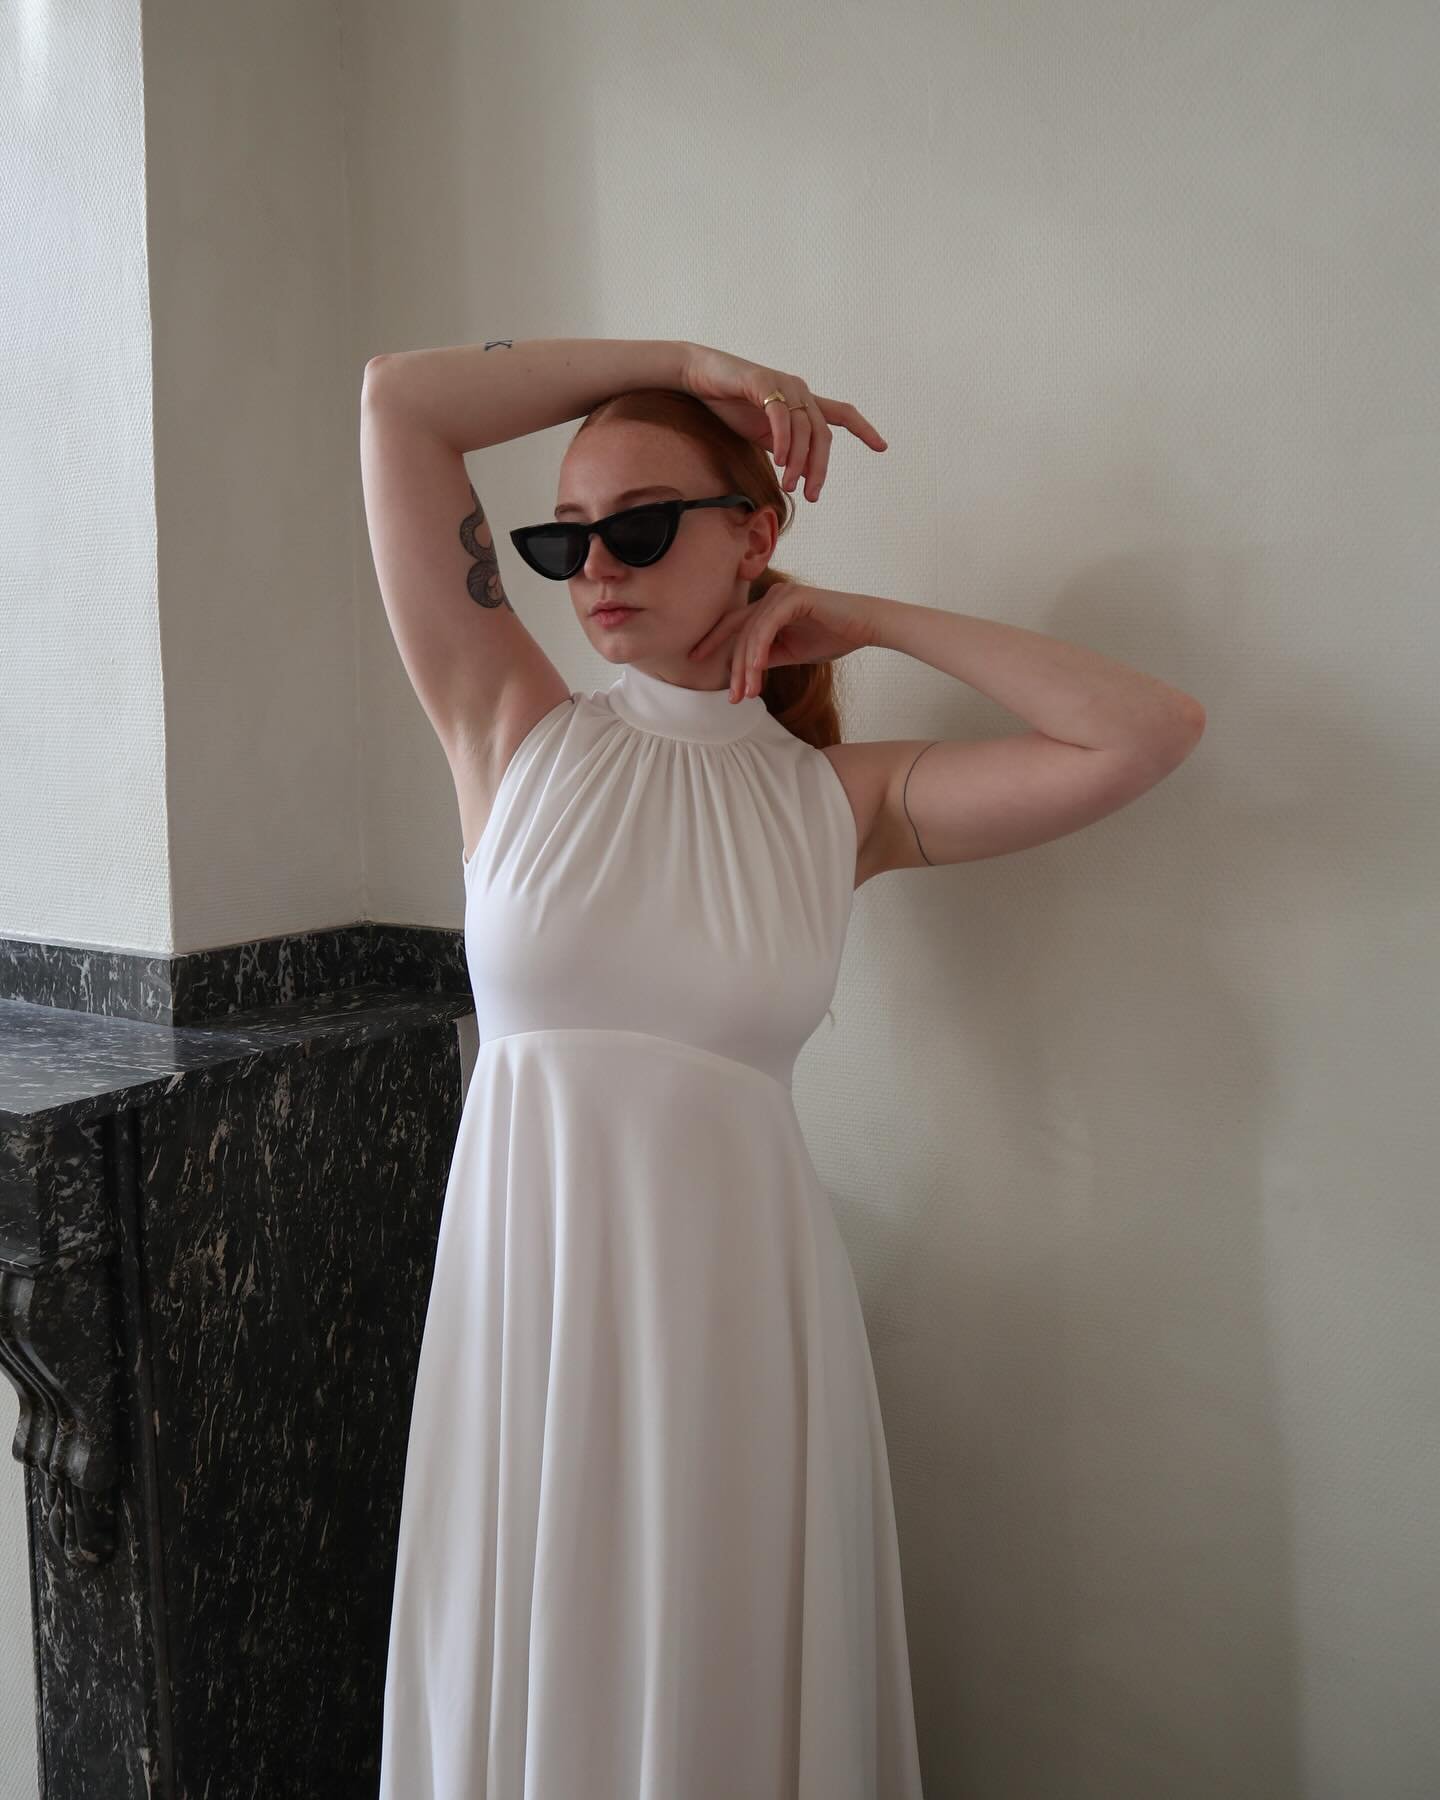 one of our vintage gowns &mdash; this sleek 70s halter neck dress is now available! #somethingpreloved